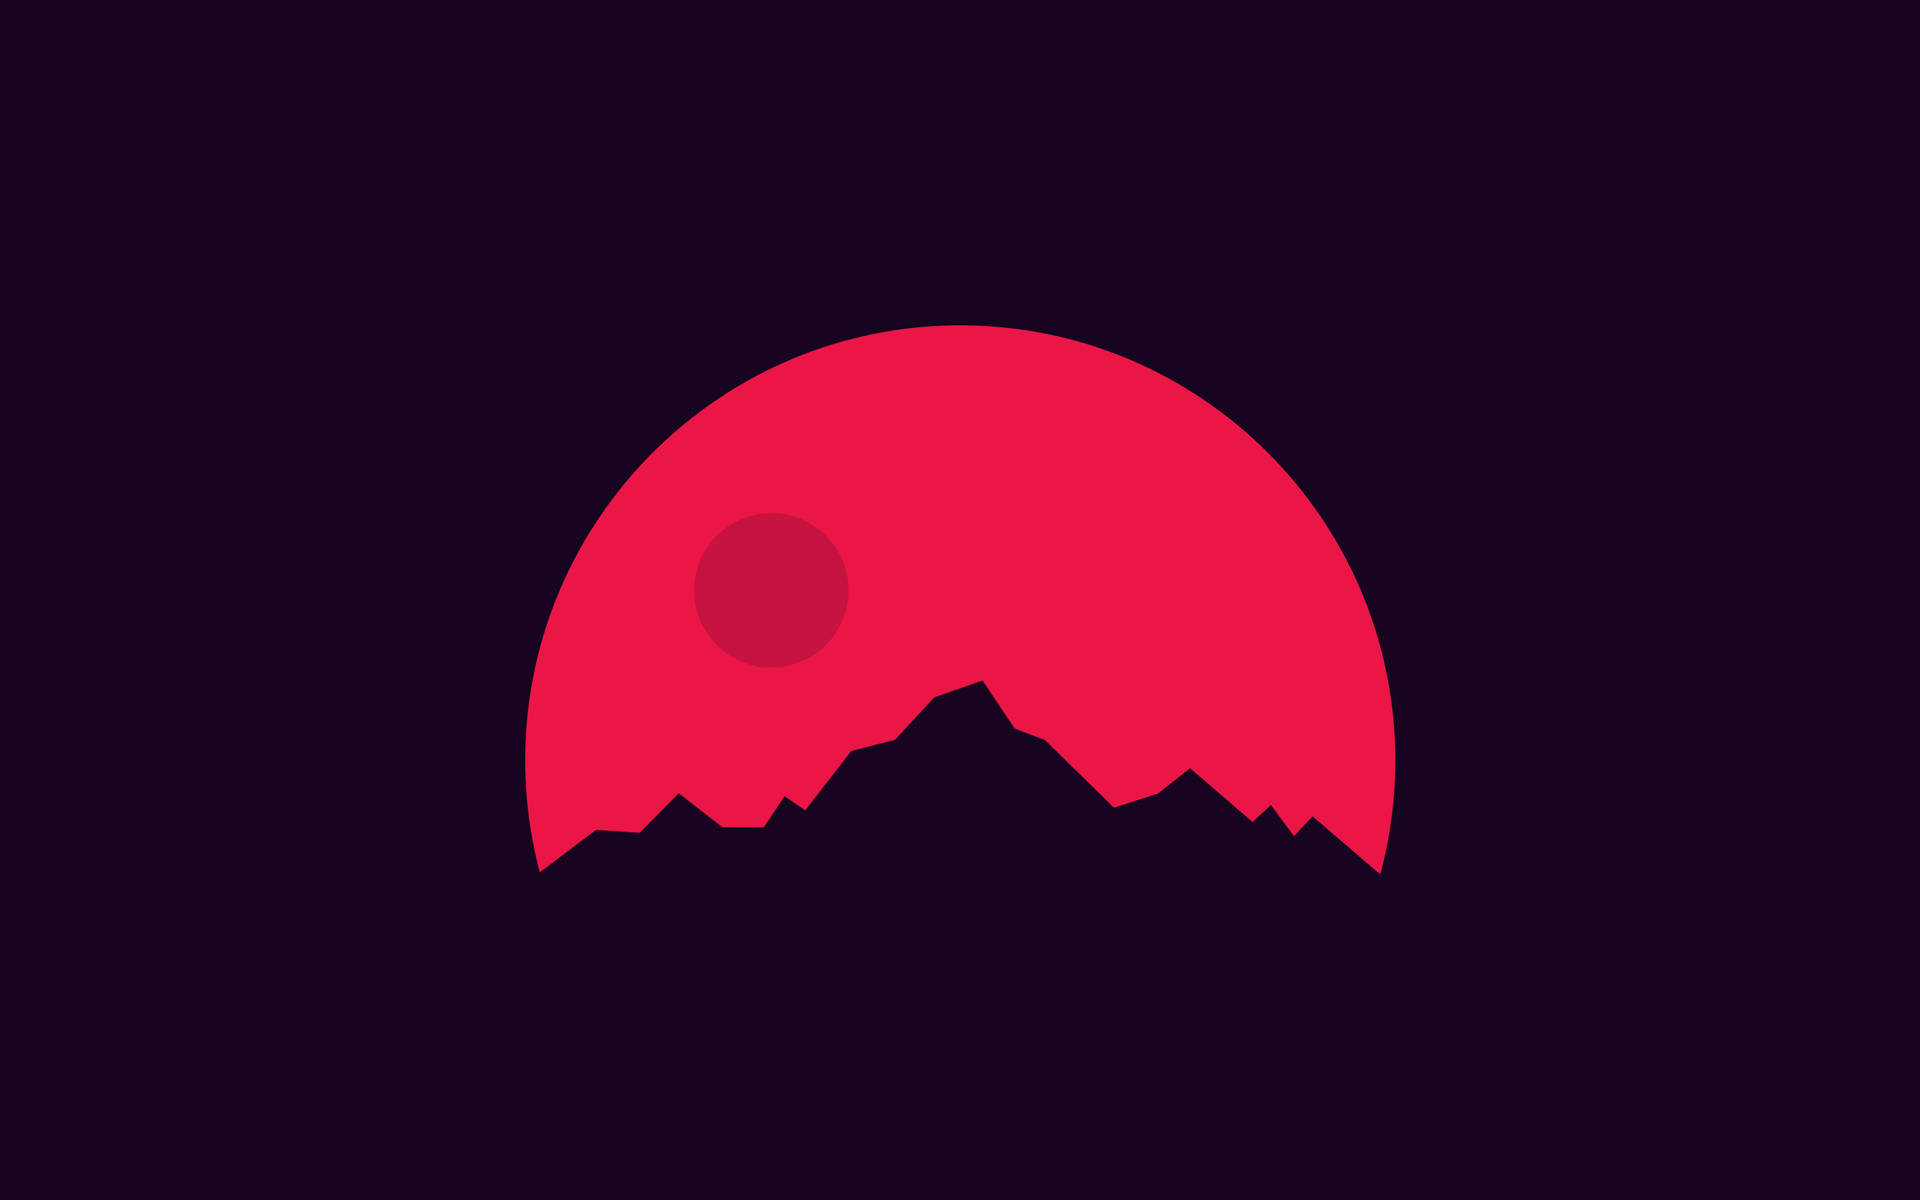 The Minimalist Beauty Of The Red Moon Background